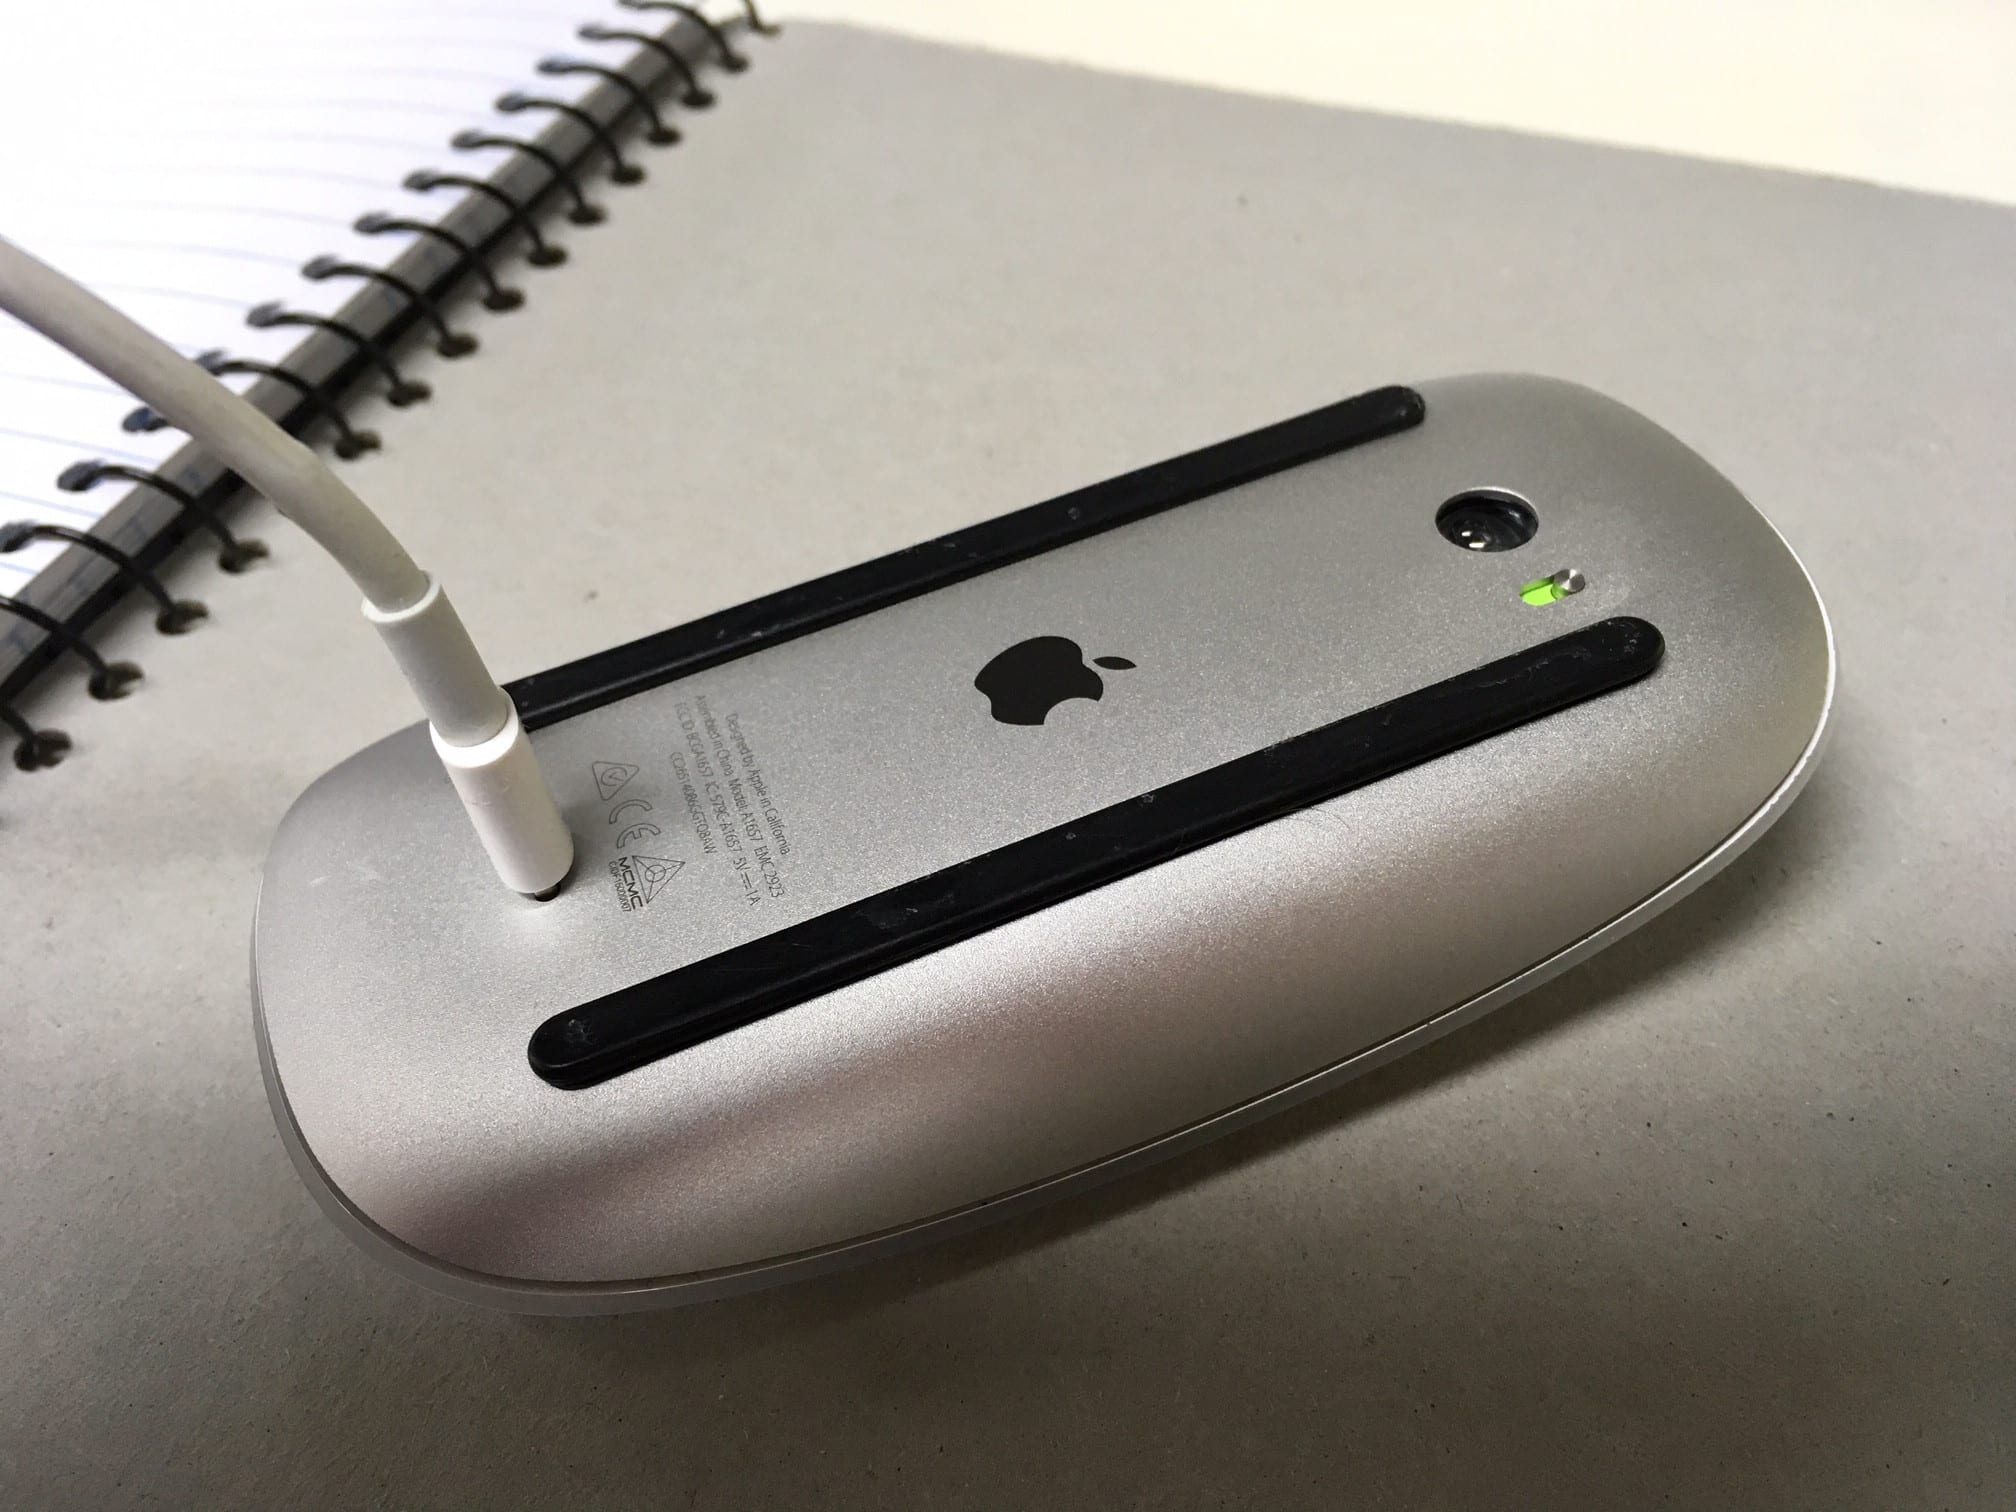 Magic Mouse continues to be Apple's ill designed products